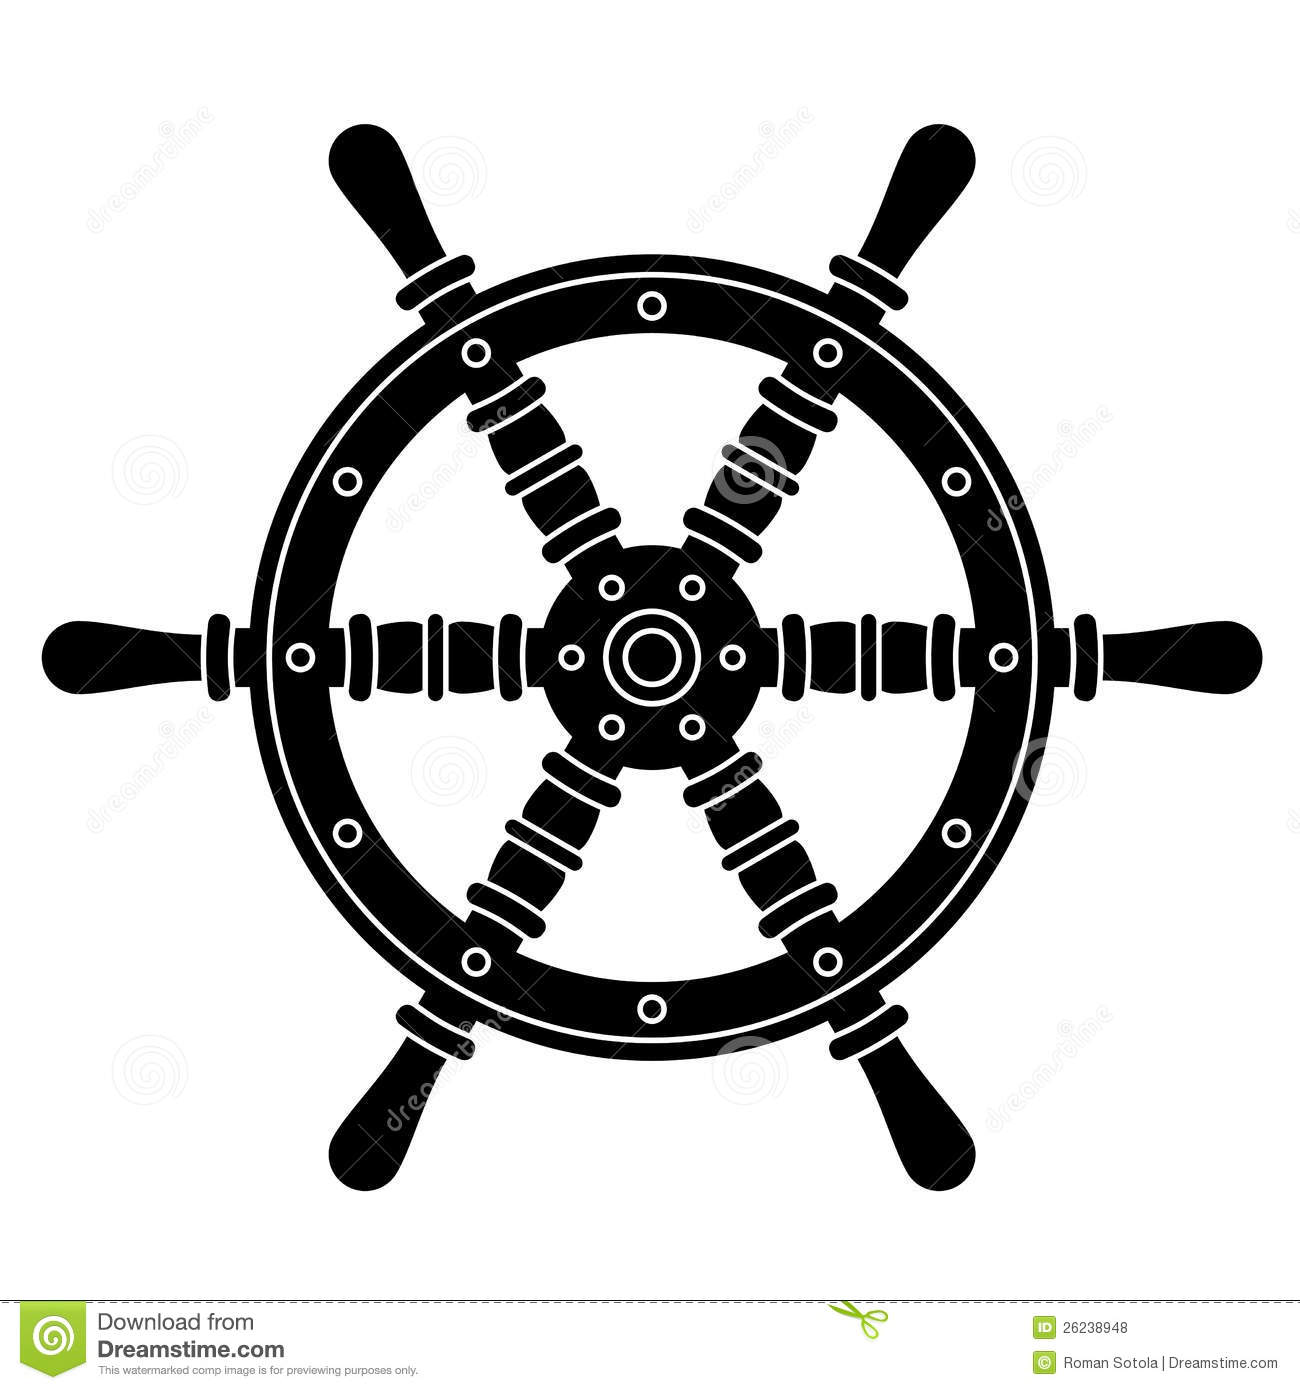 Nautical Boat Steering Wheel Silhouette Royalty Free Stock Photos    